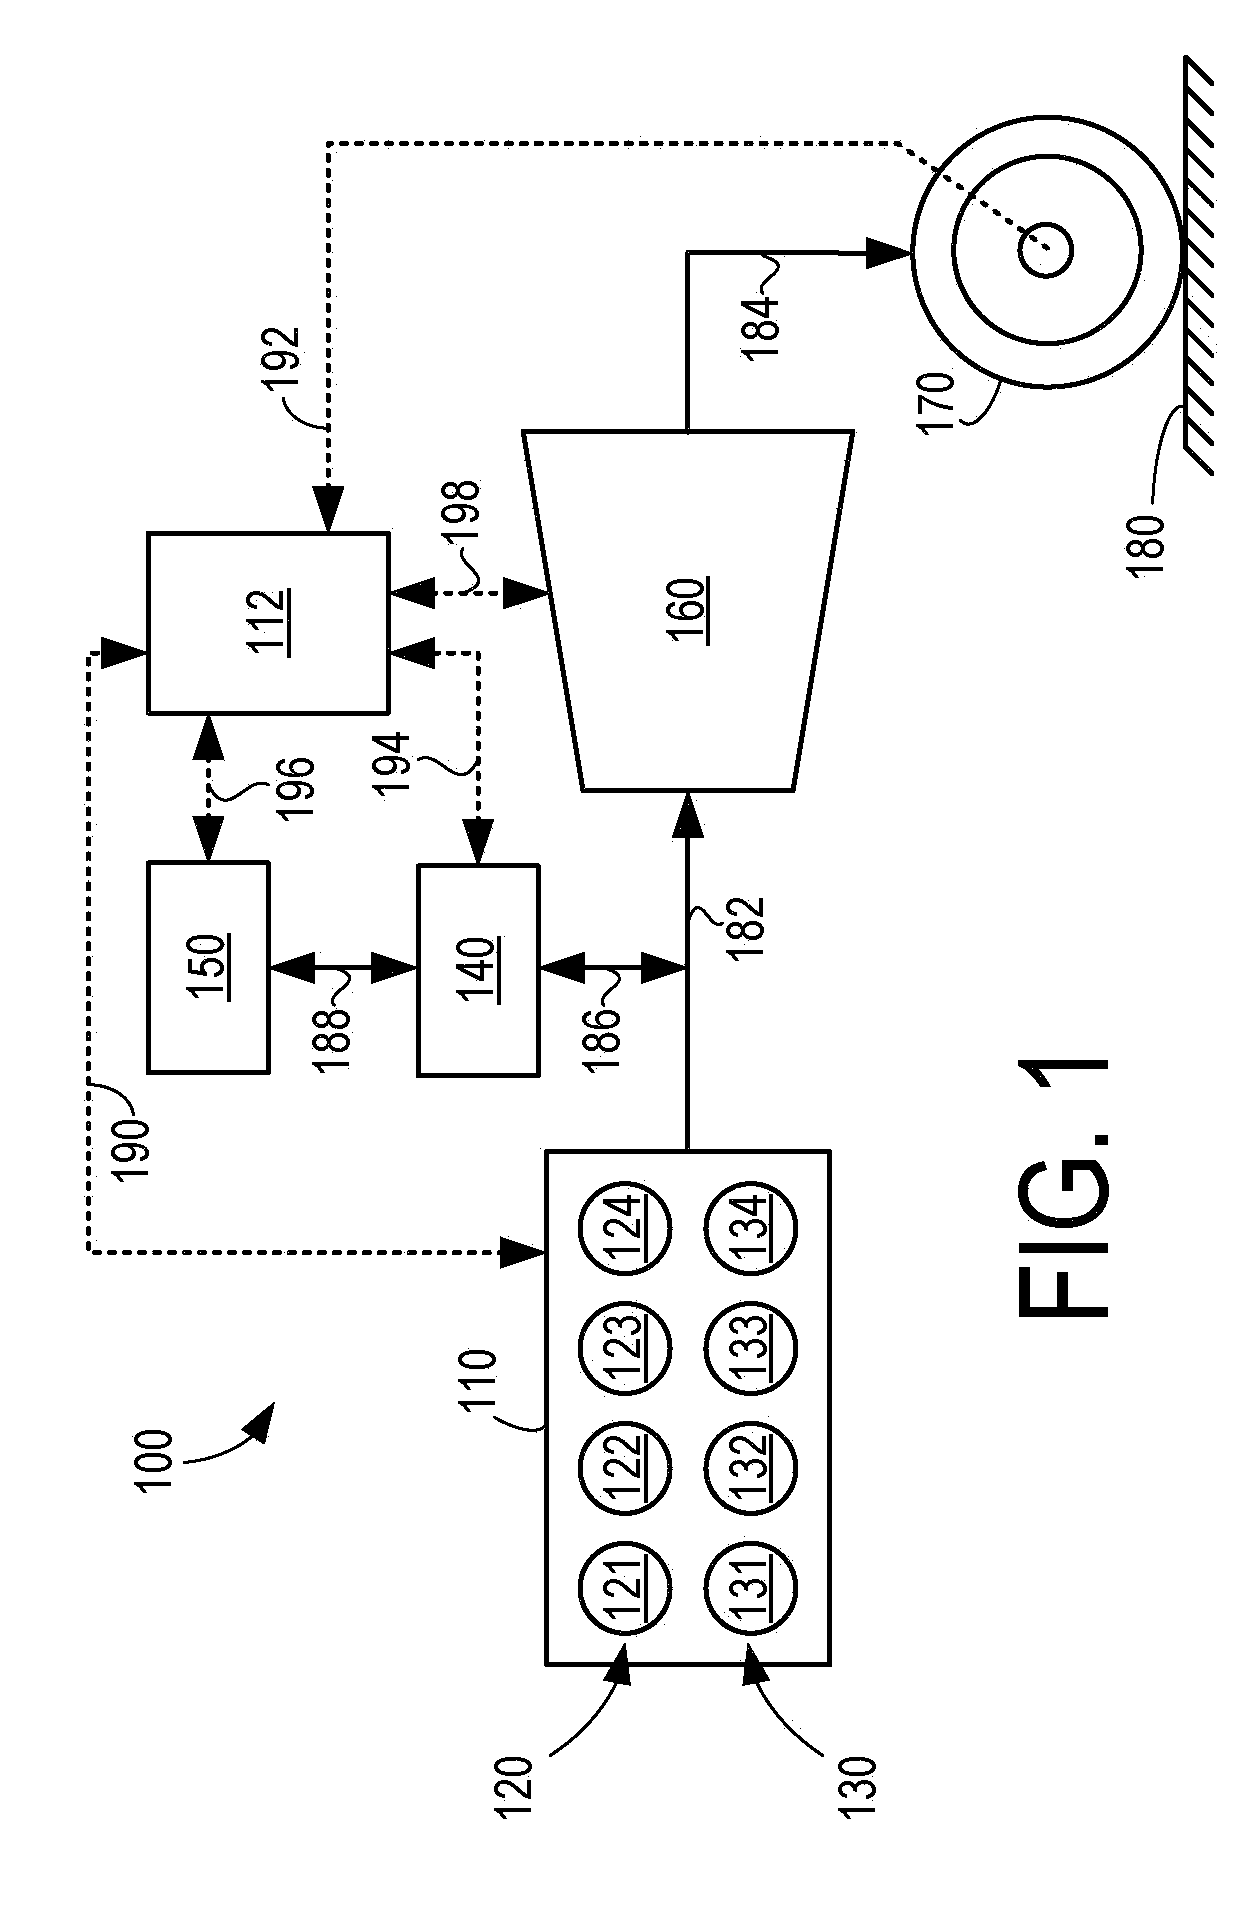 Control strategy for multi-stroke engine system